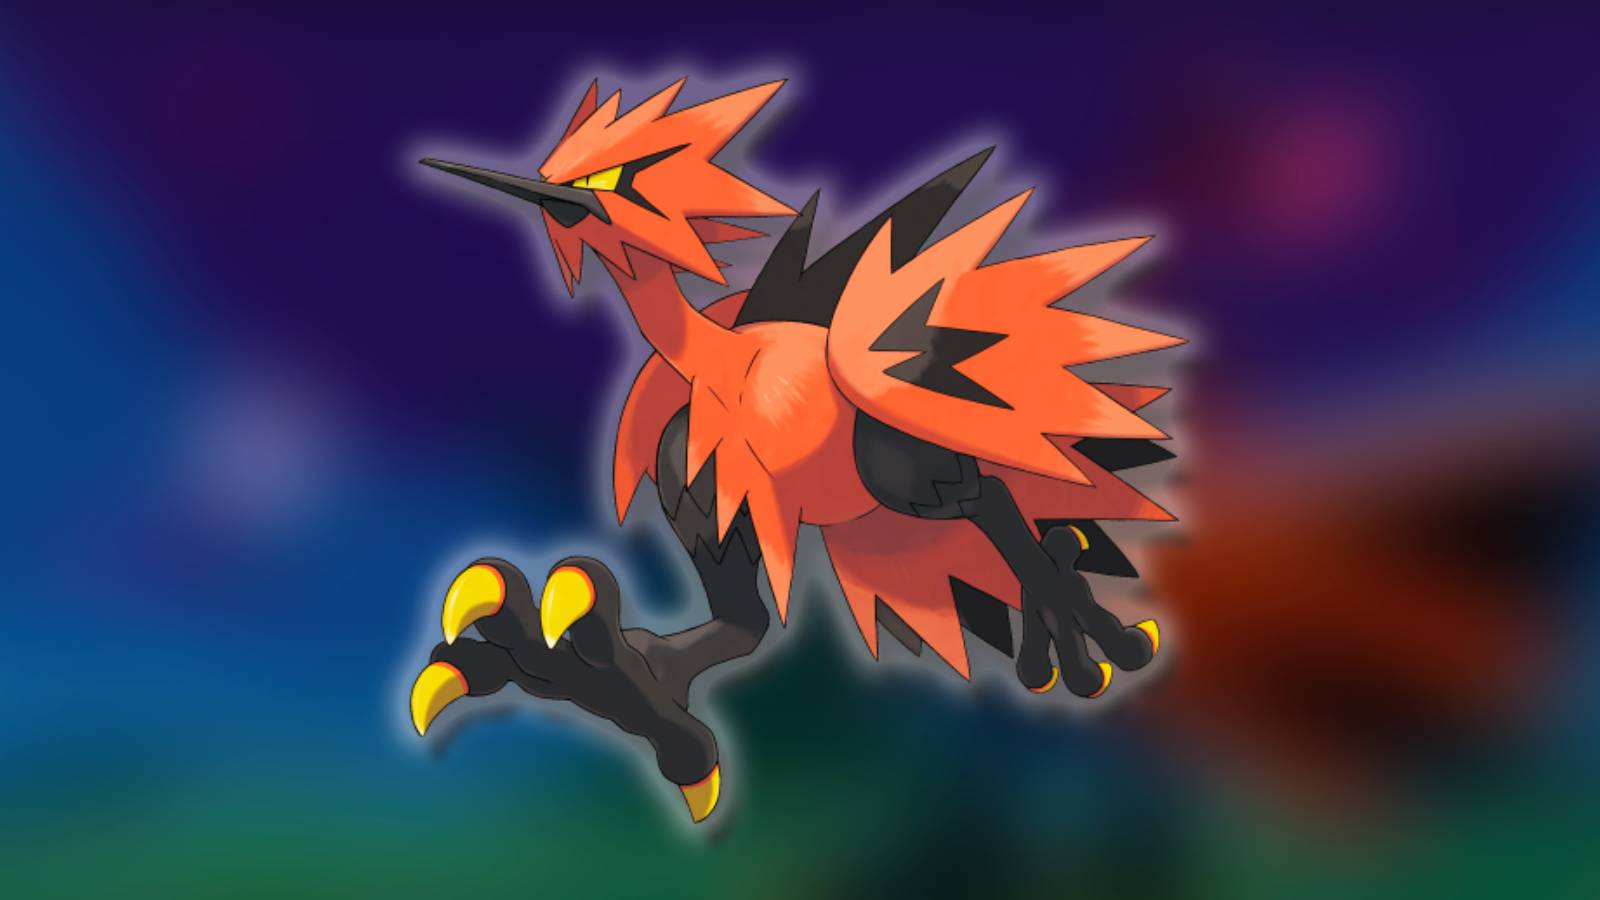 The Pokemon Galarian Zapdos appears against a blurred background